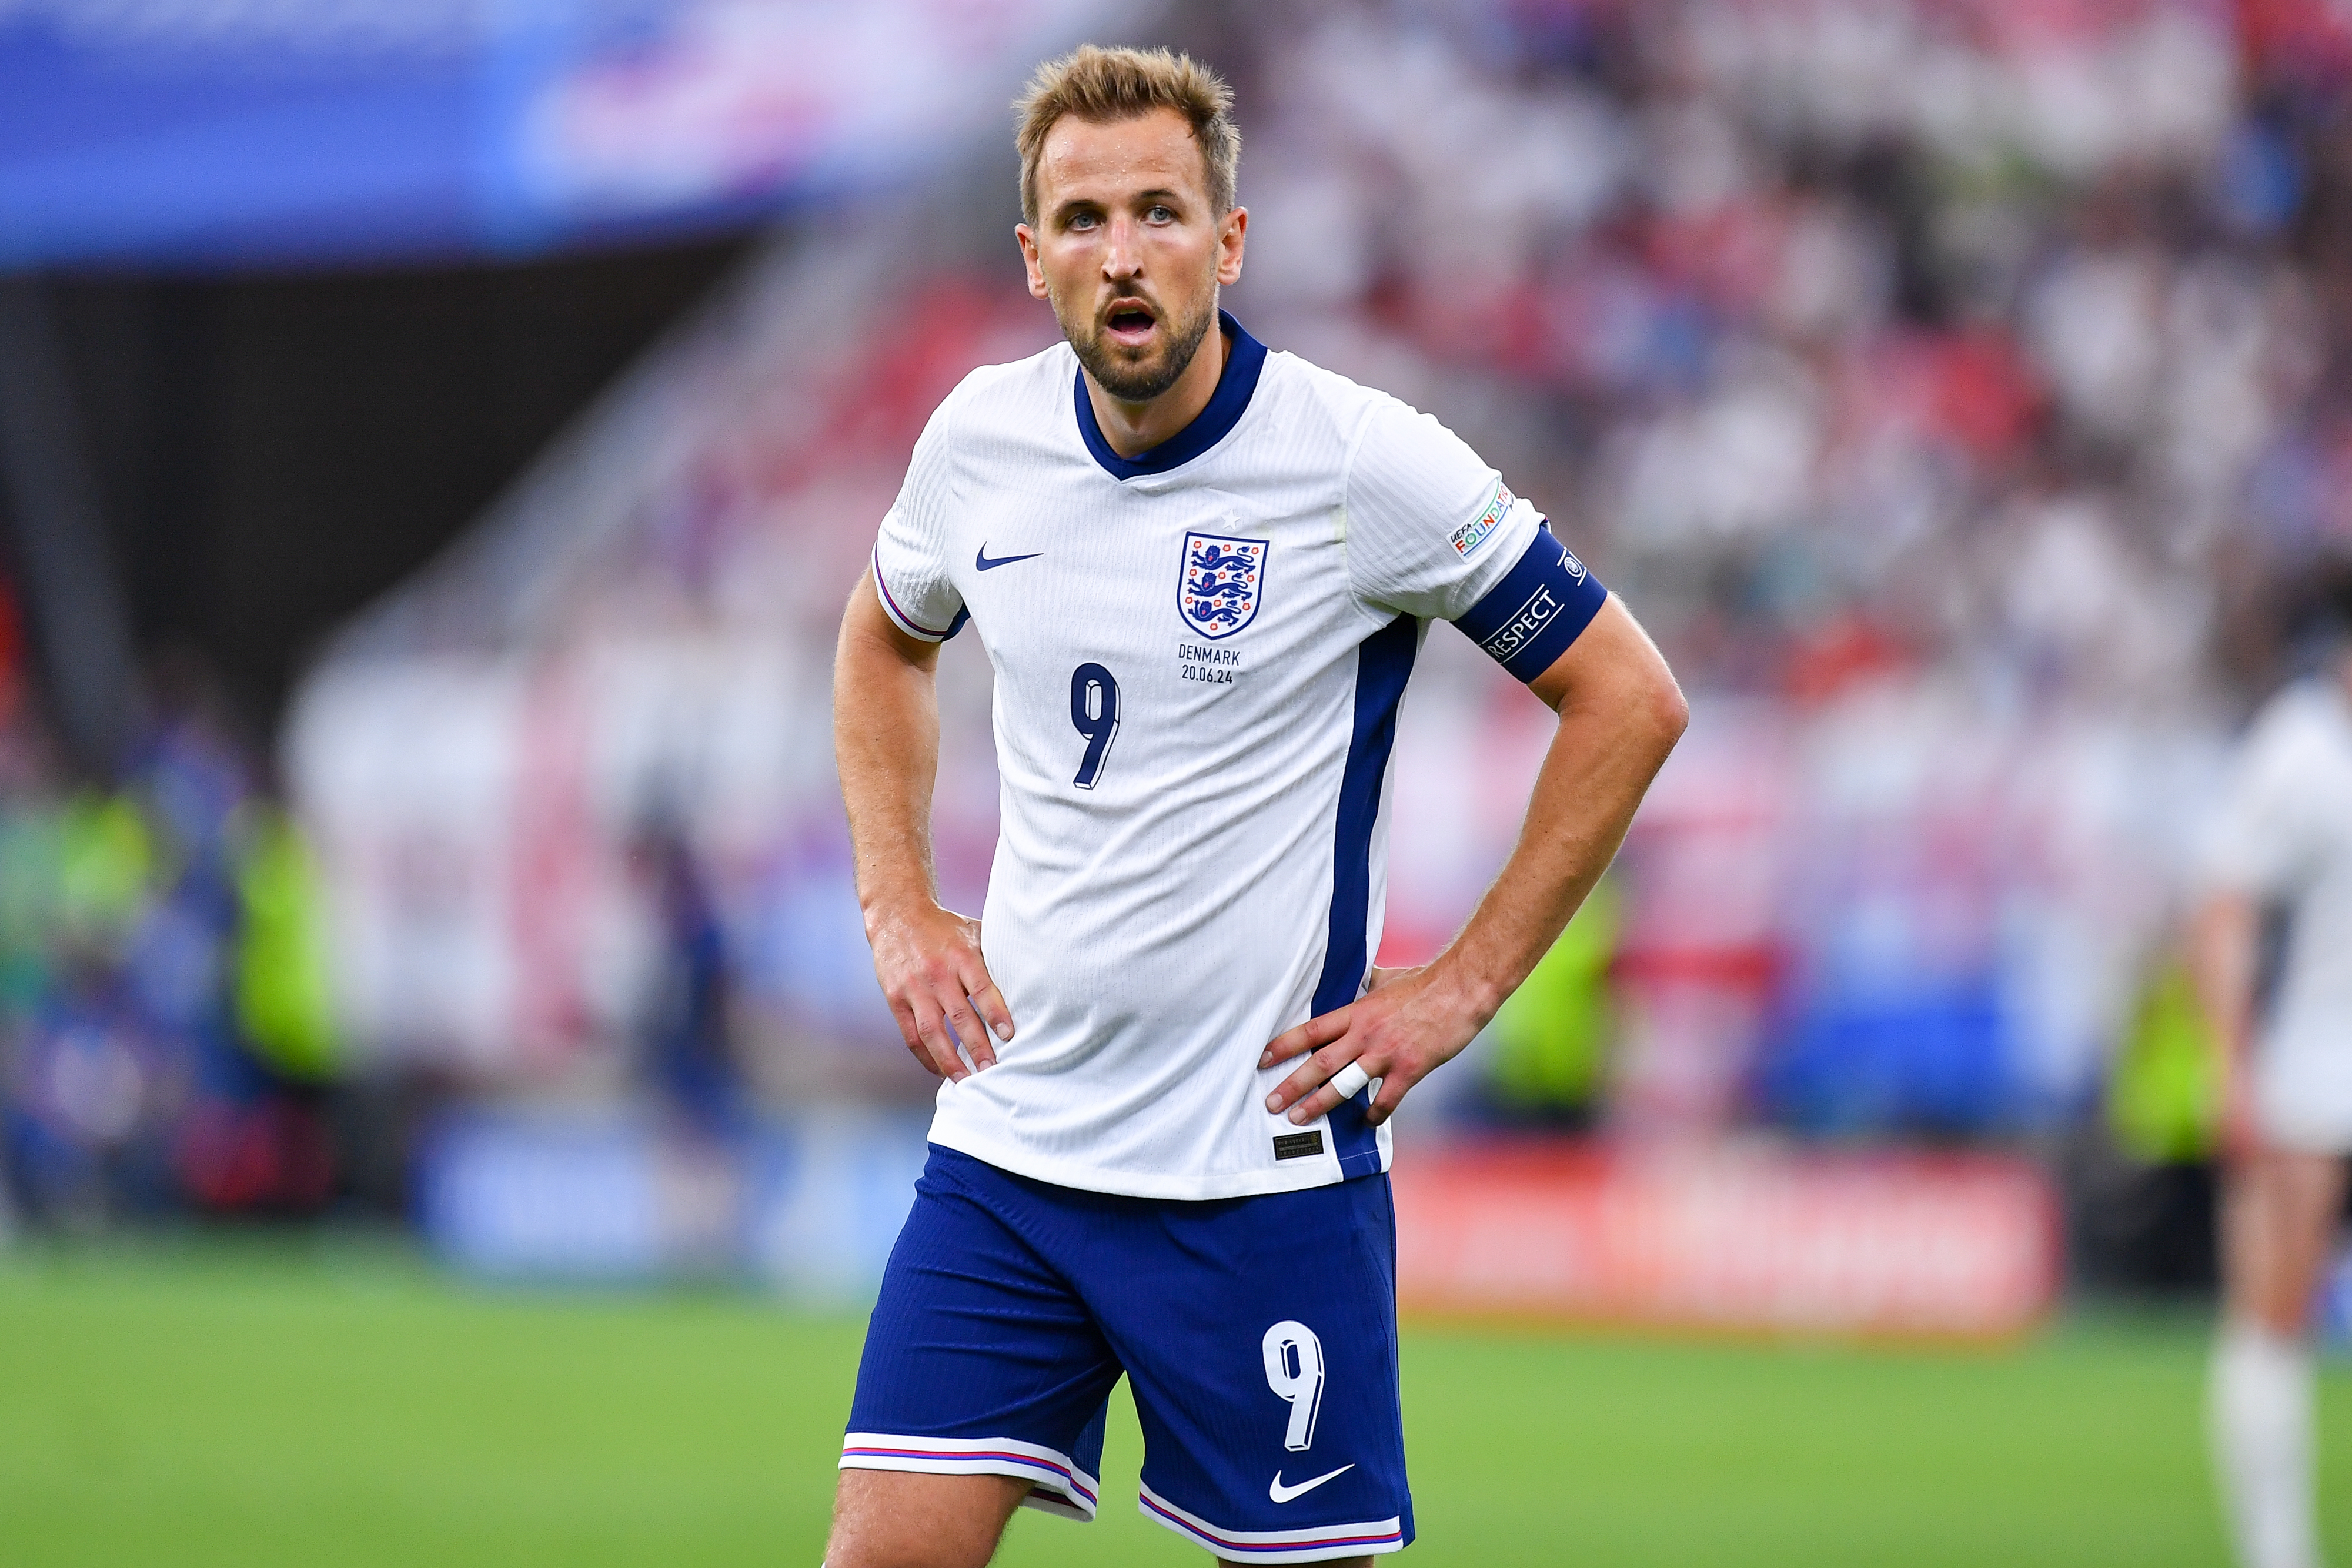 Harry Kane scored the opening goal in what ended as a draw for England against Denmark